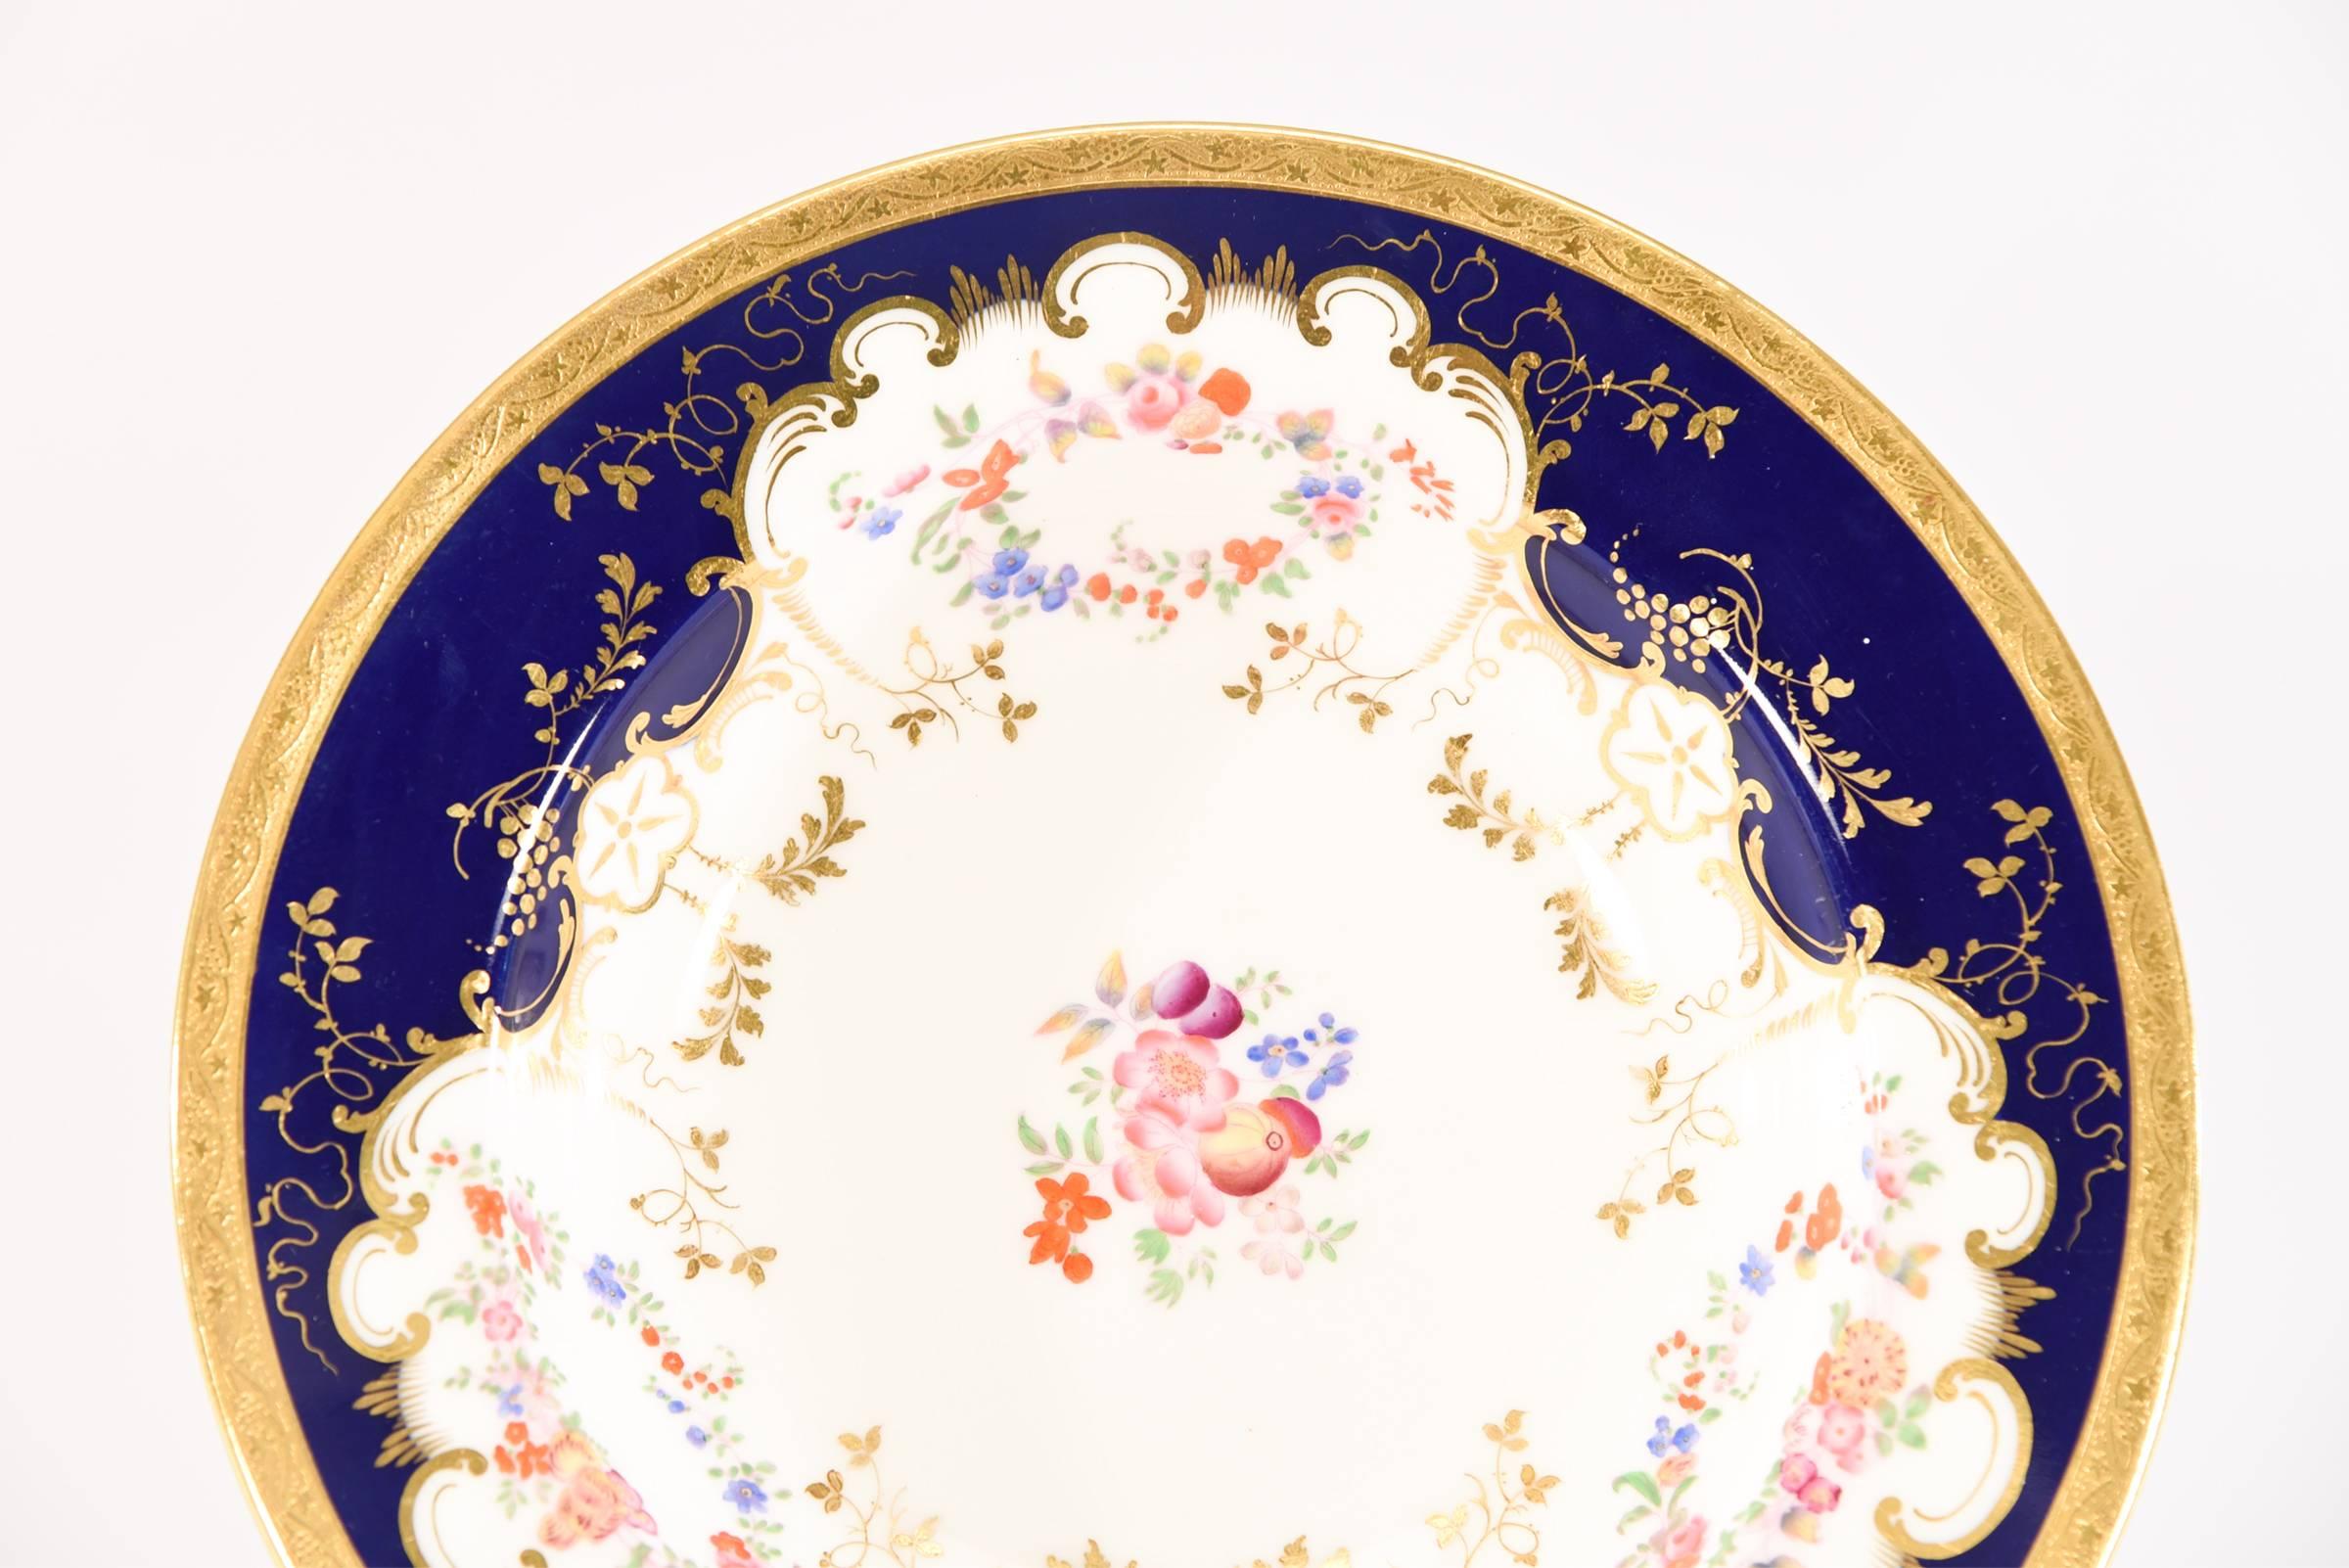 This set of 12 large rimmed soup bowls dating from 1882, are hand painted and gilded showcasing the expert talent of the Minton factory. Retailed by Gilman, Collamore, NY., the Tiffany of department stores at the turn of the century, these are